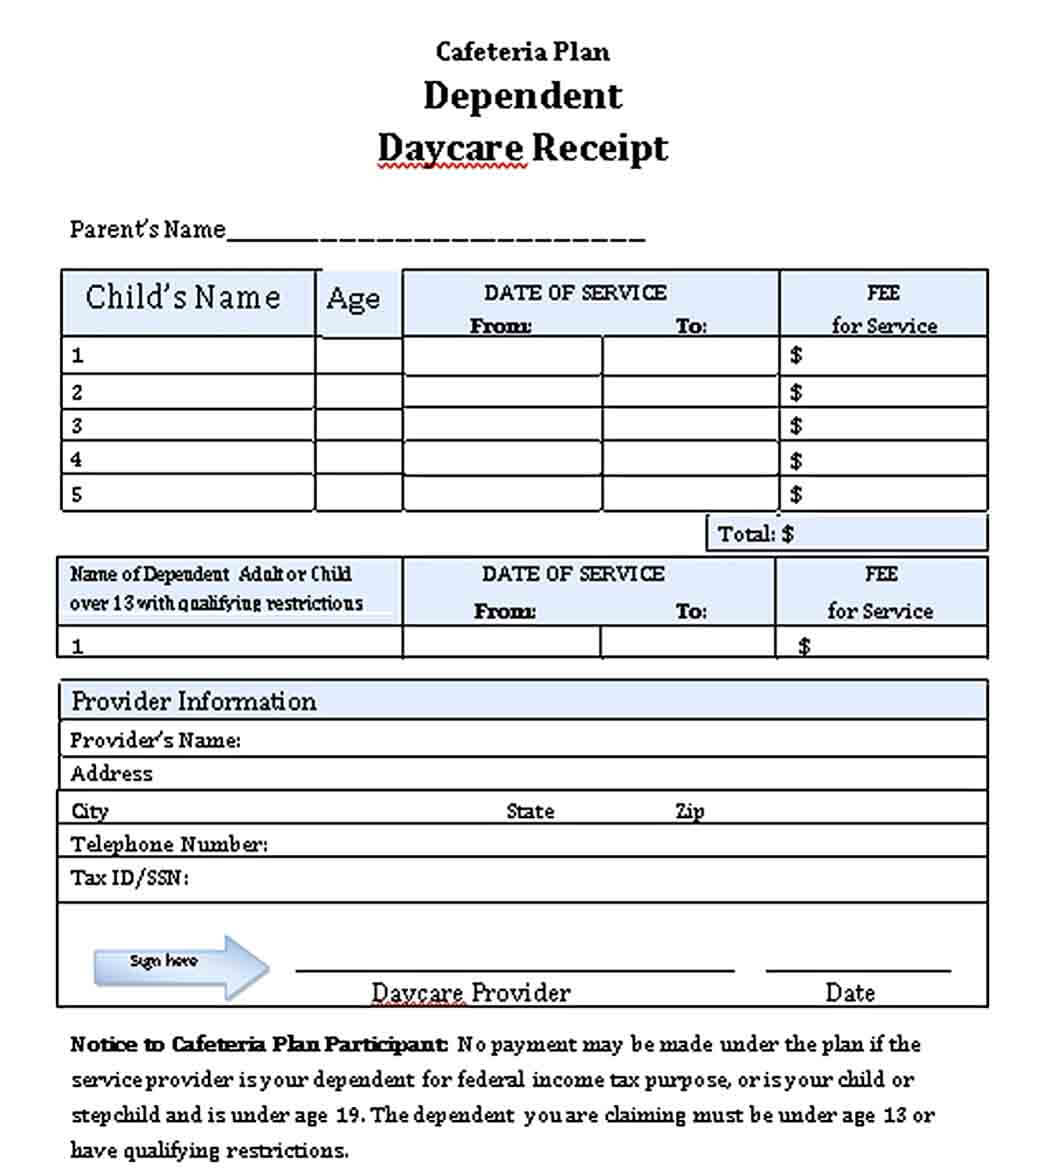 Dependent Daycare Receipt Template1